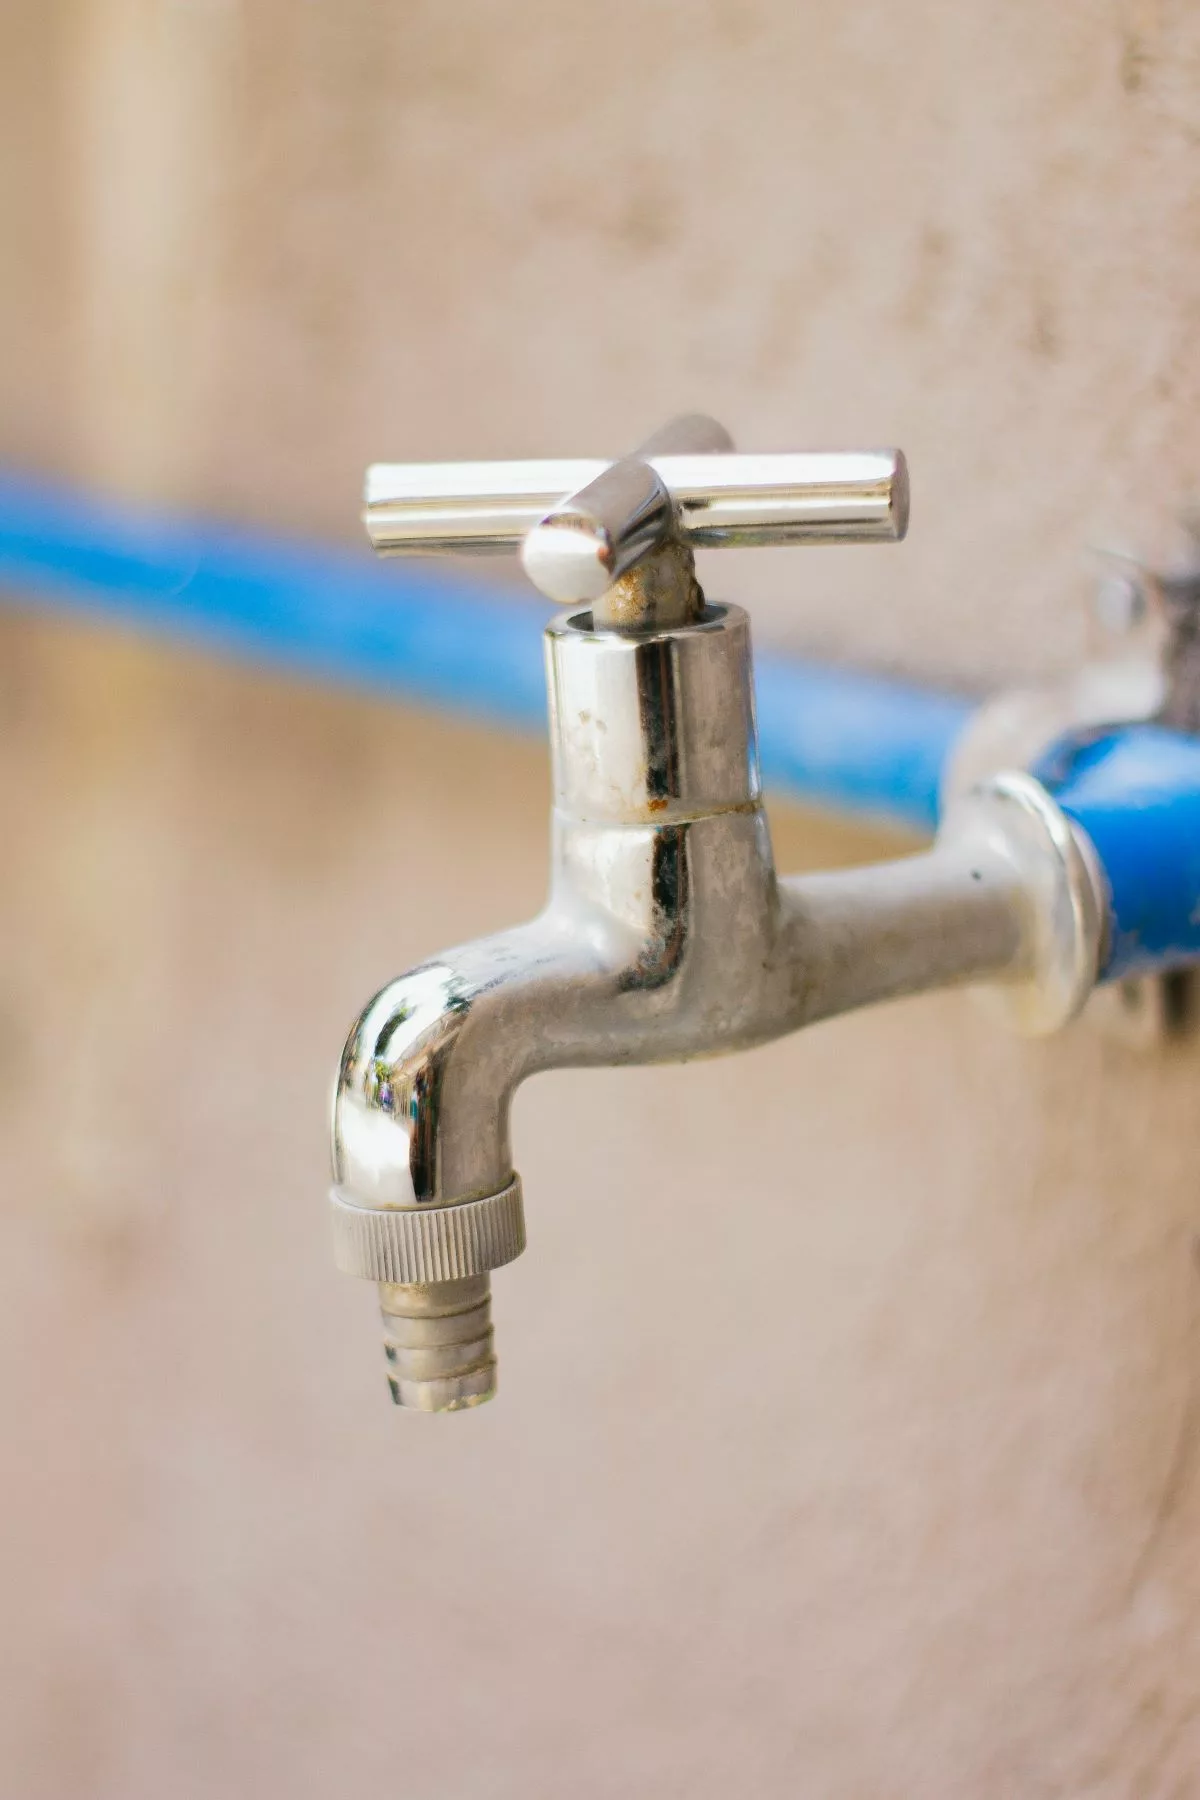 Essential Plumbing Maintenance Tips to Prevent Costly Repairs